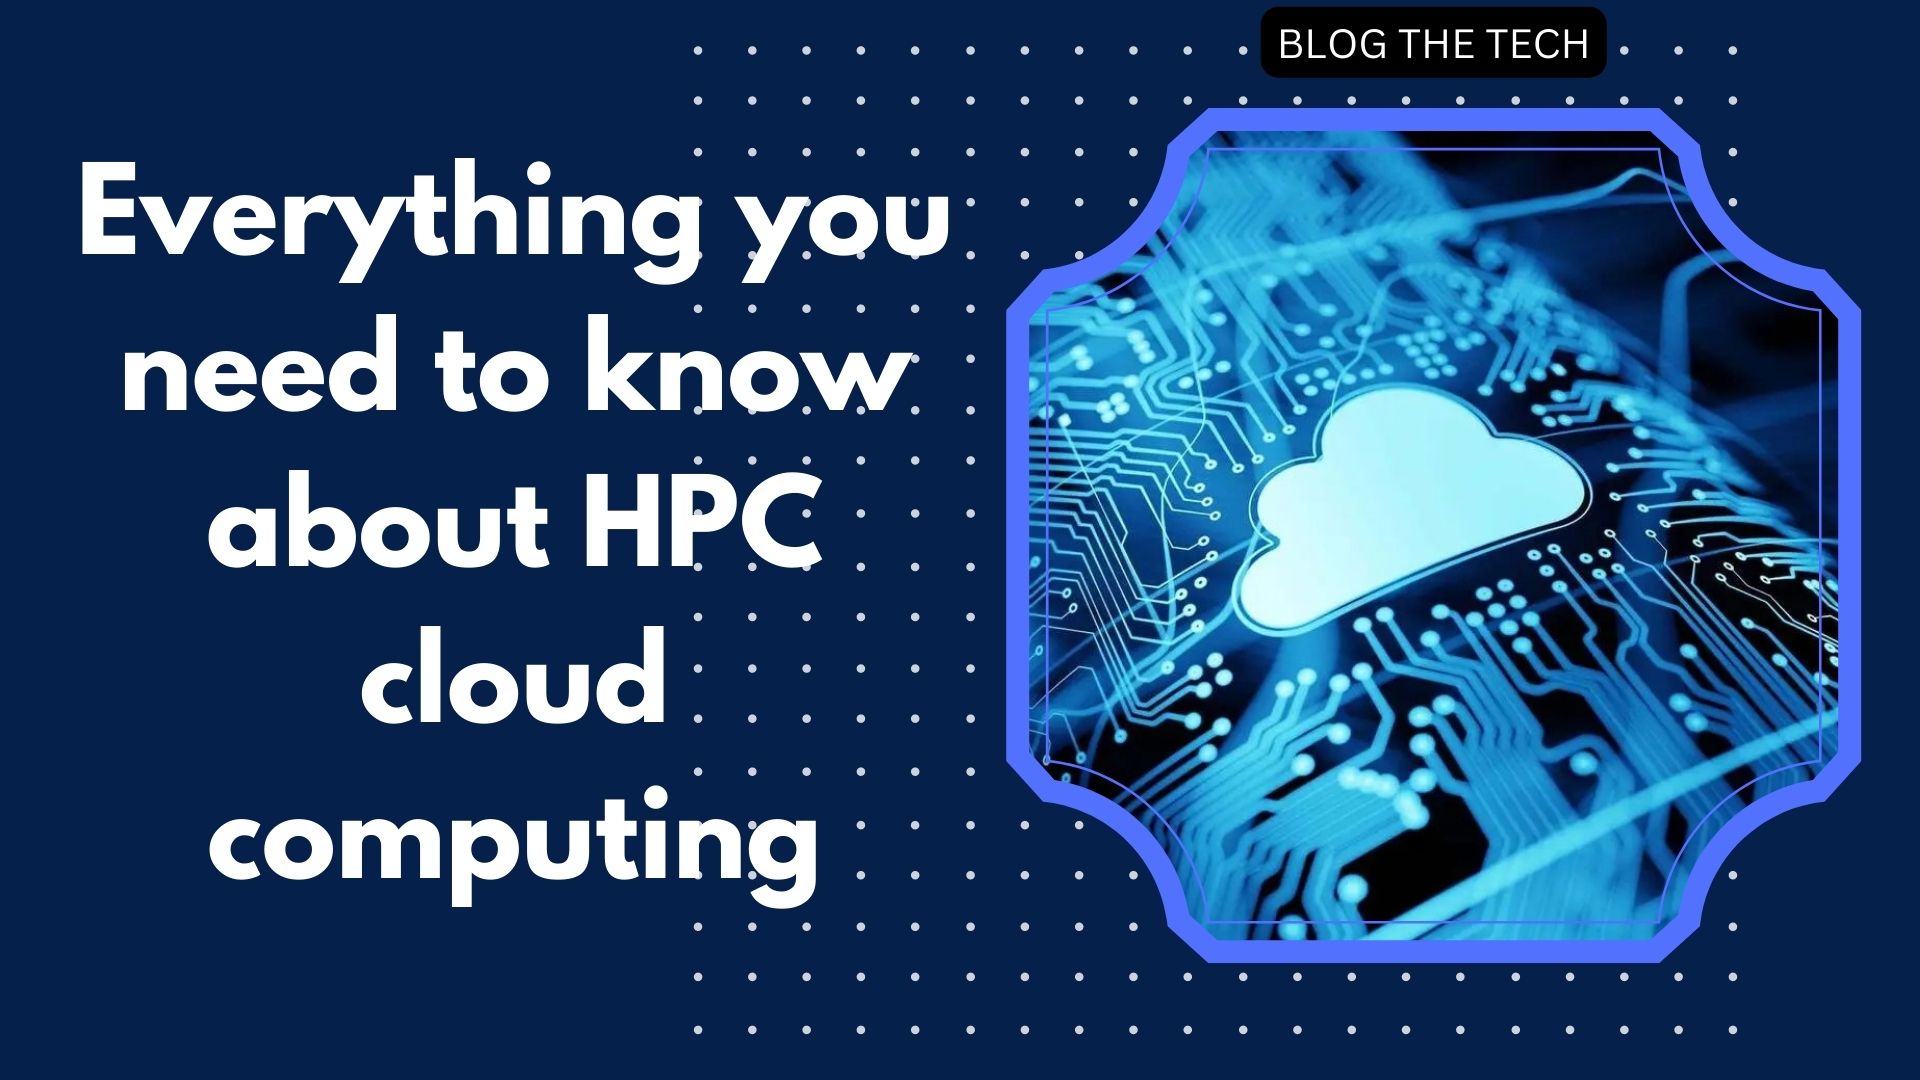 Everything you need to know about HPC cloud computing